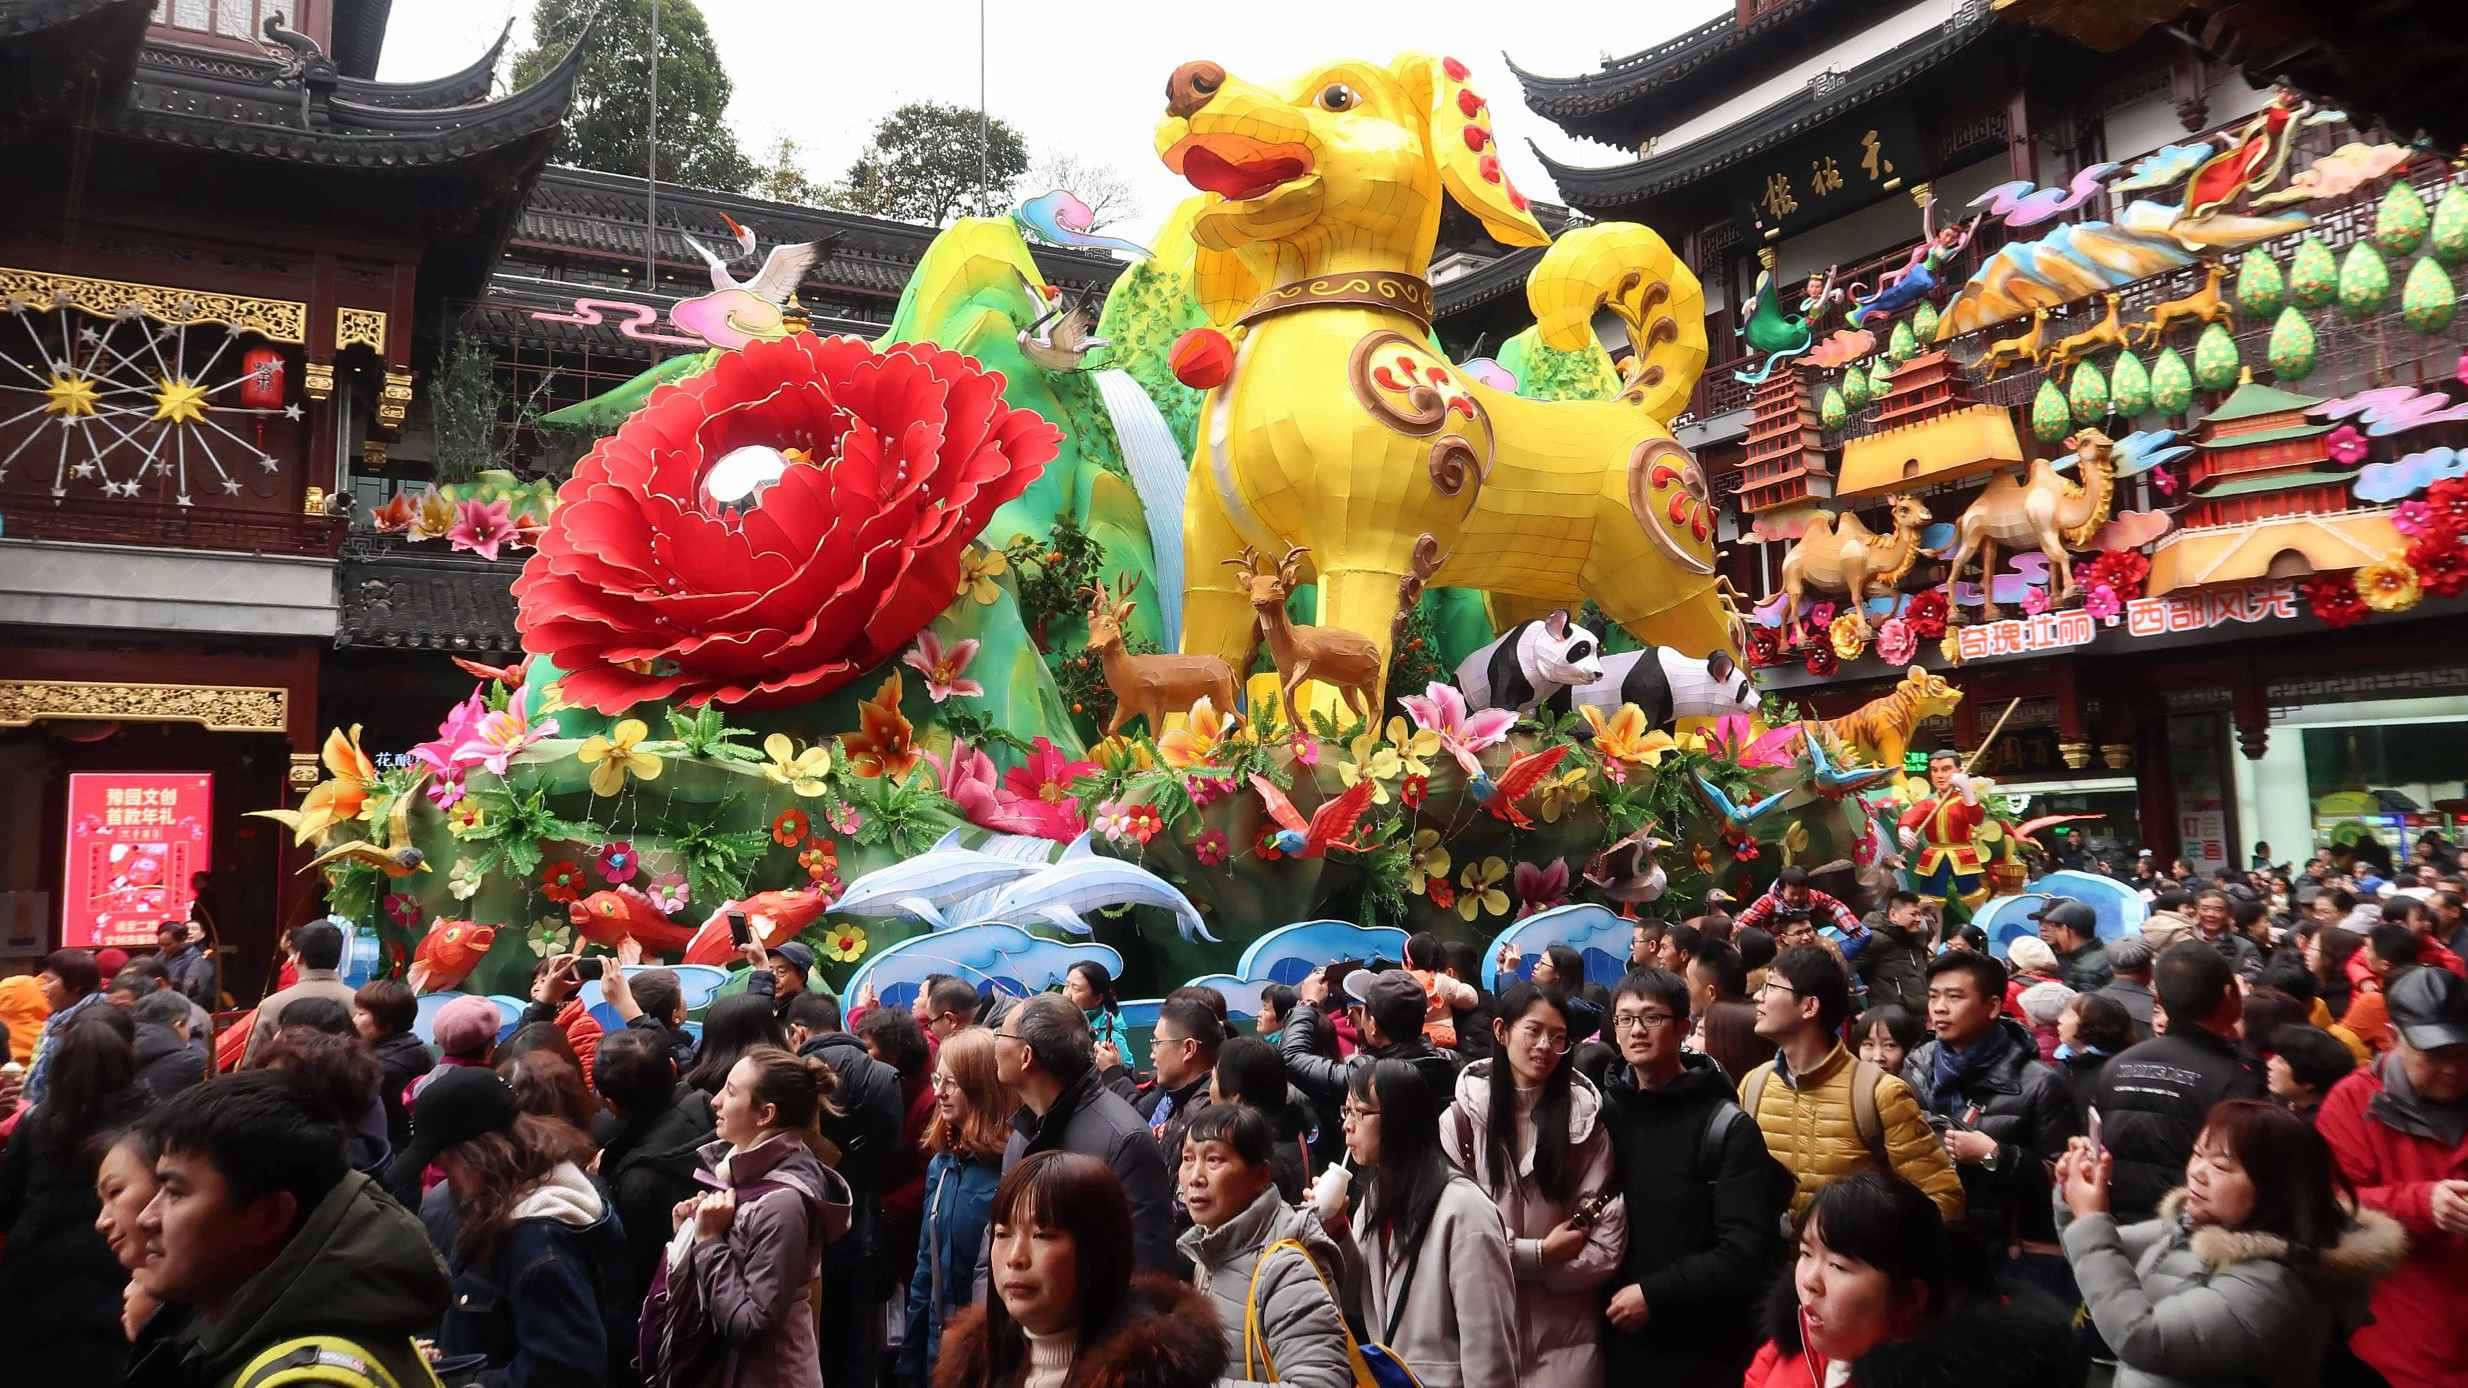 More than 200 million trips made during Spring Festival holiday so far